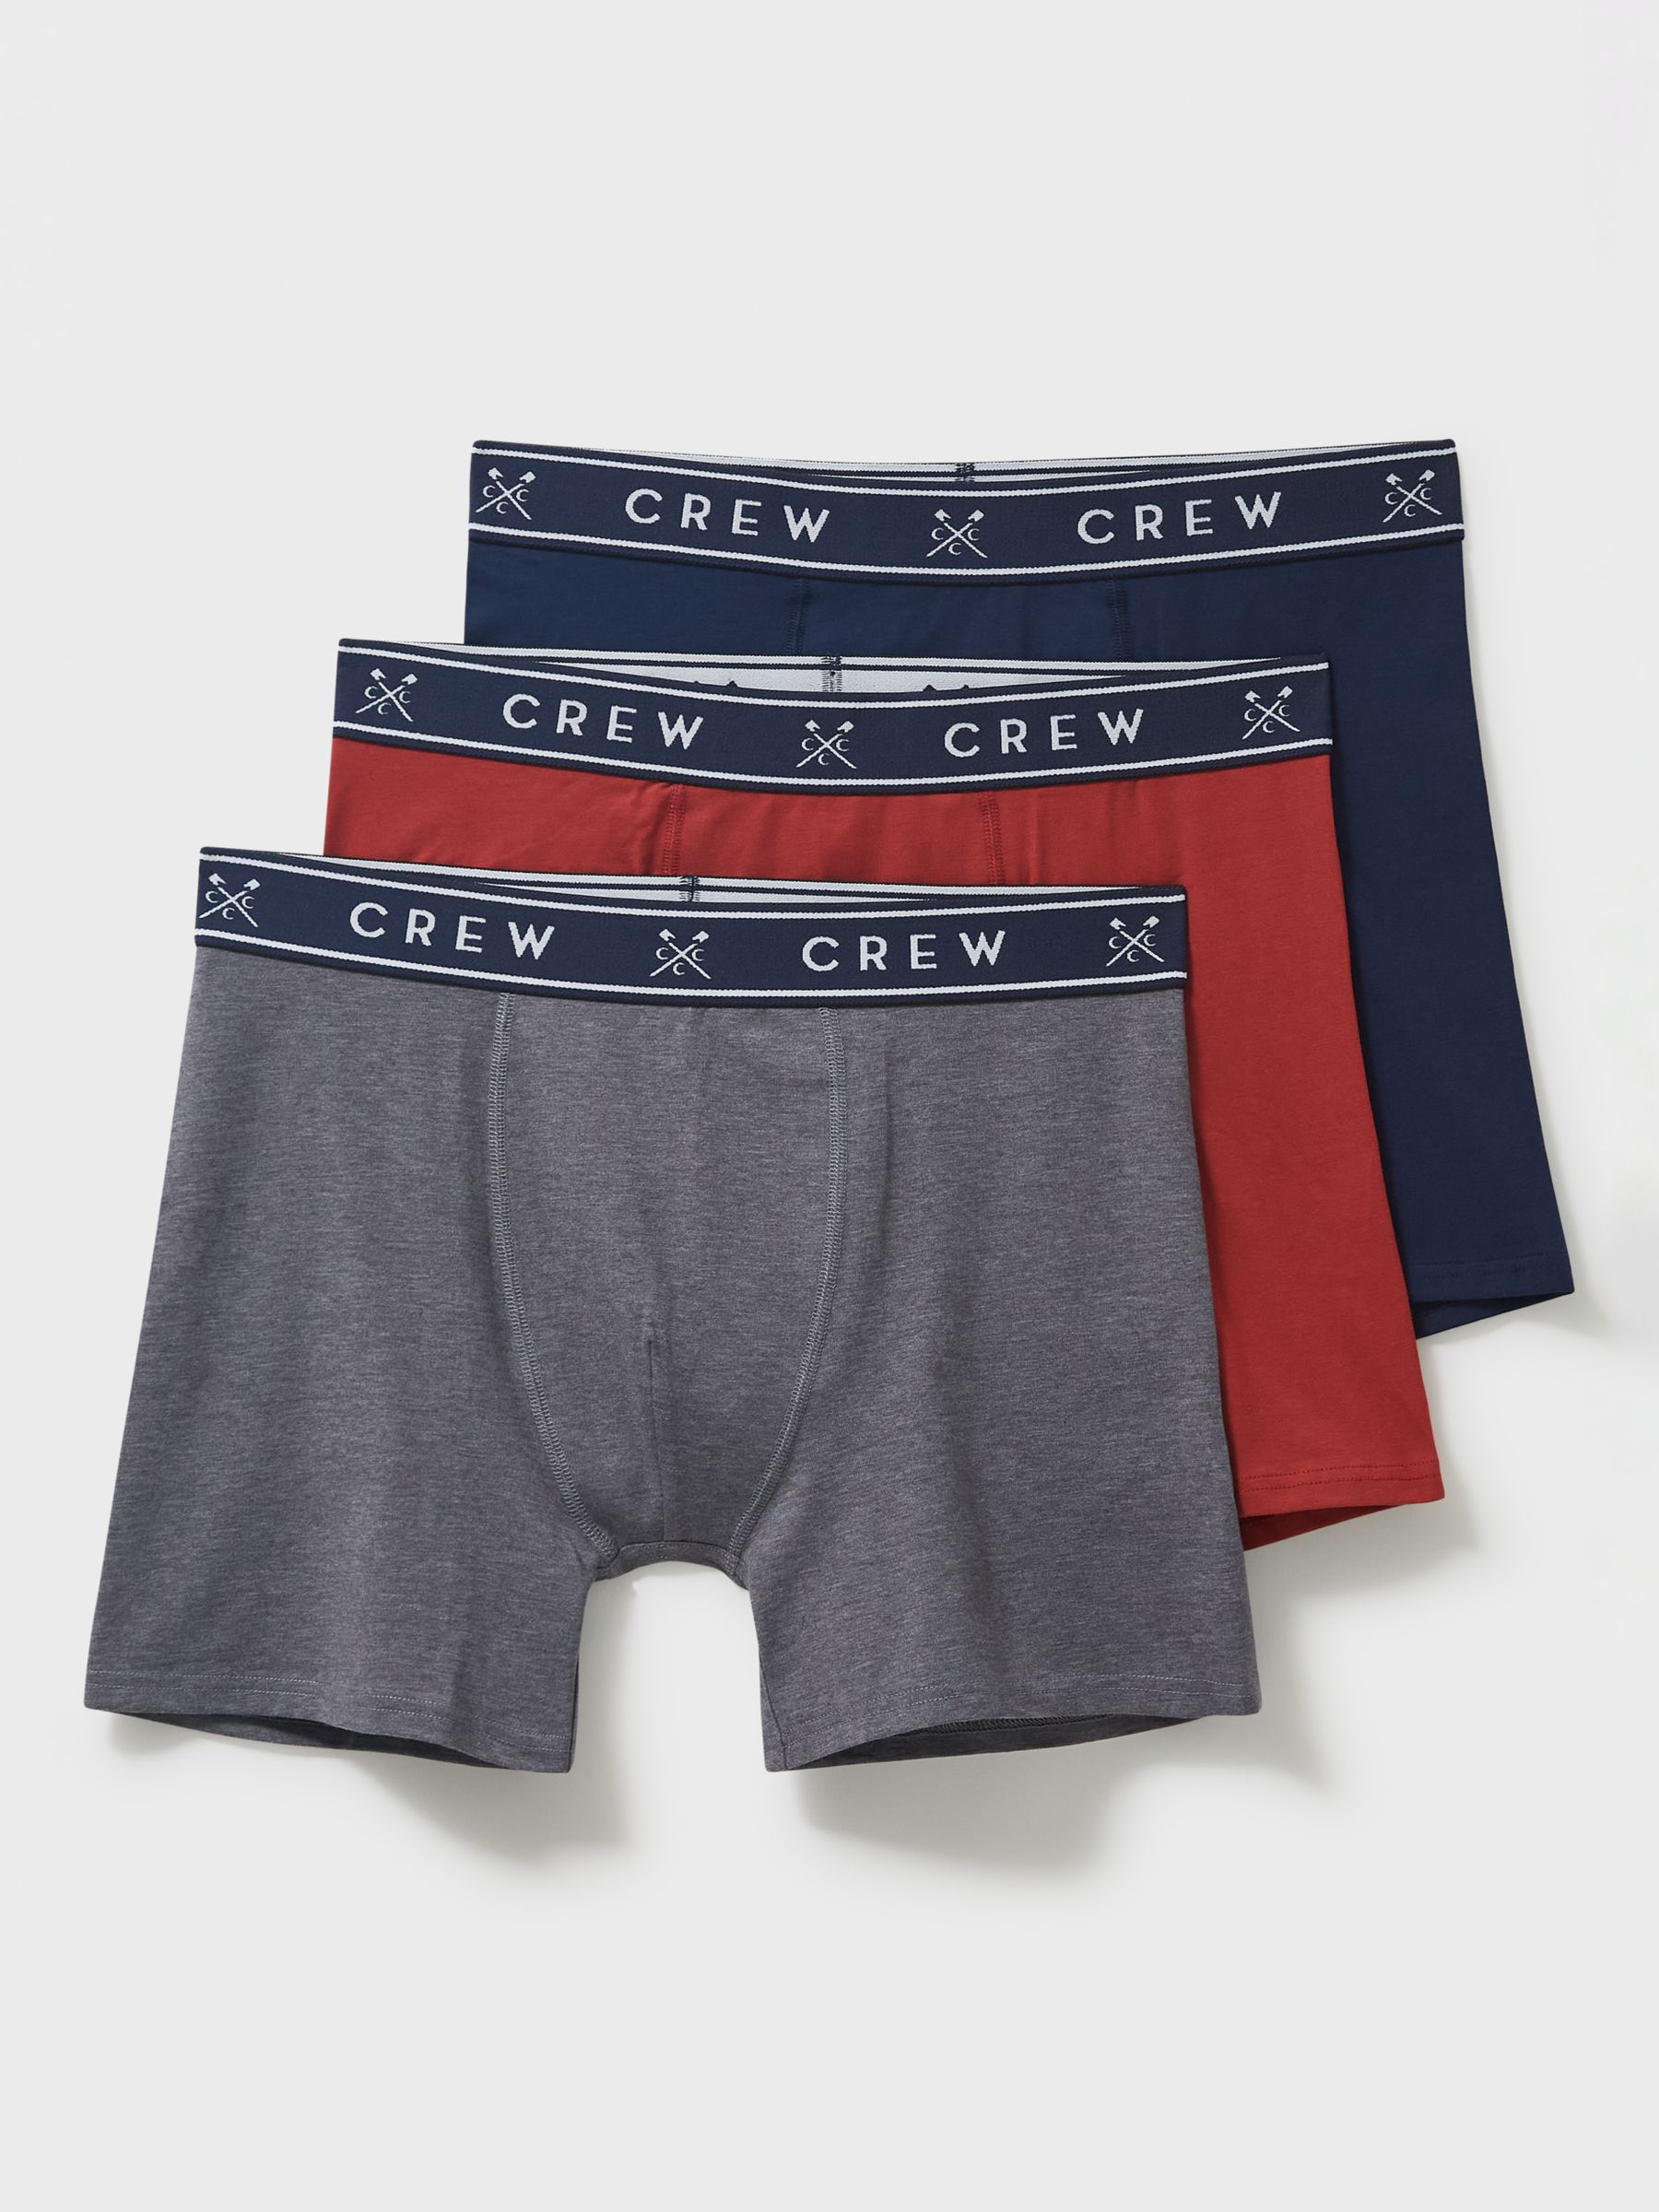 Crew Clothing Jersey Boxers, Pack of 3, Navy/Grey/Red, L